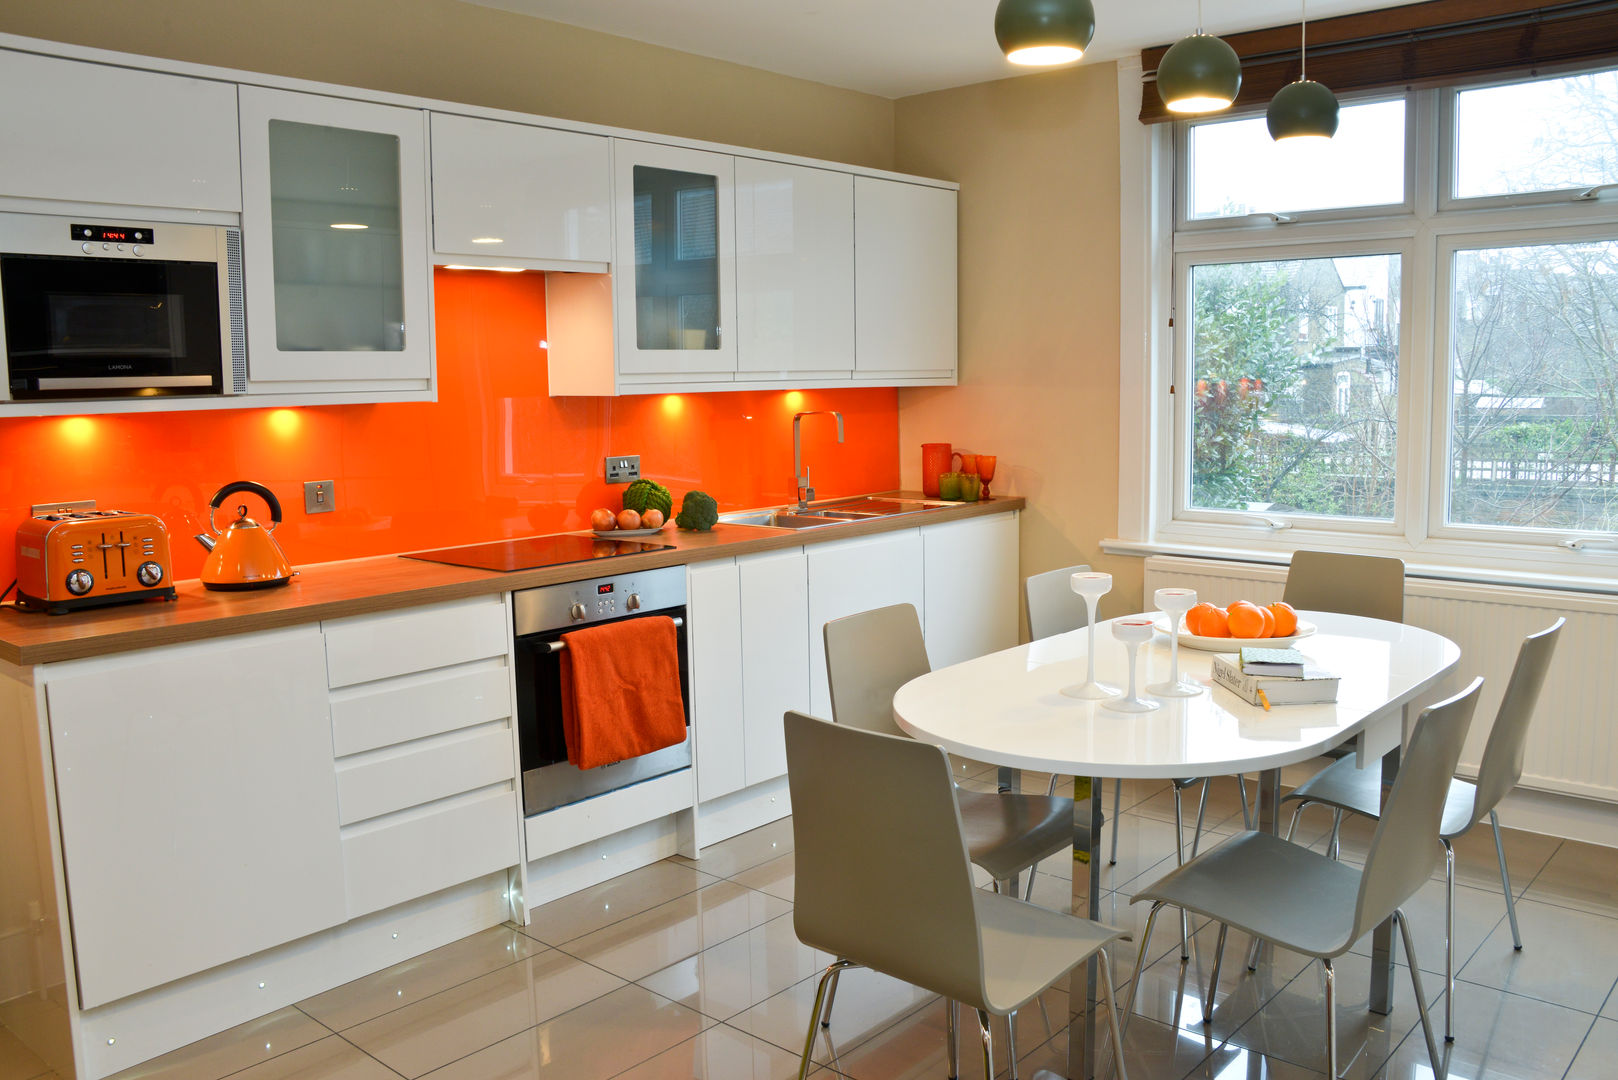 A Bright and Breezy Kitchen, Cathy Phillips & Co Cathy Phillips & Co Moderne keukens